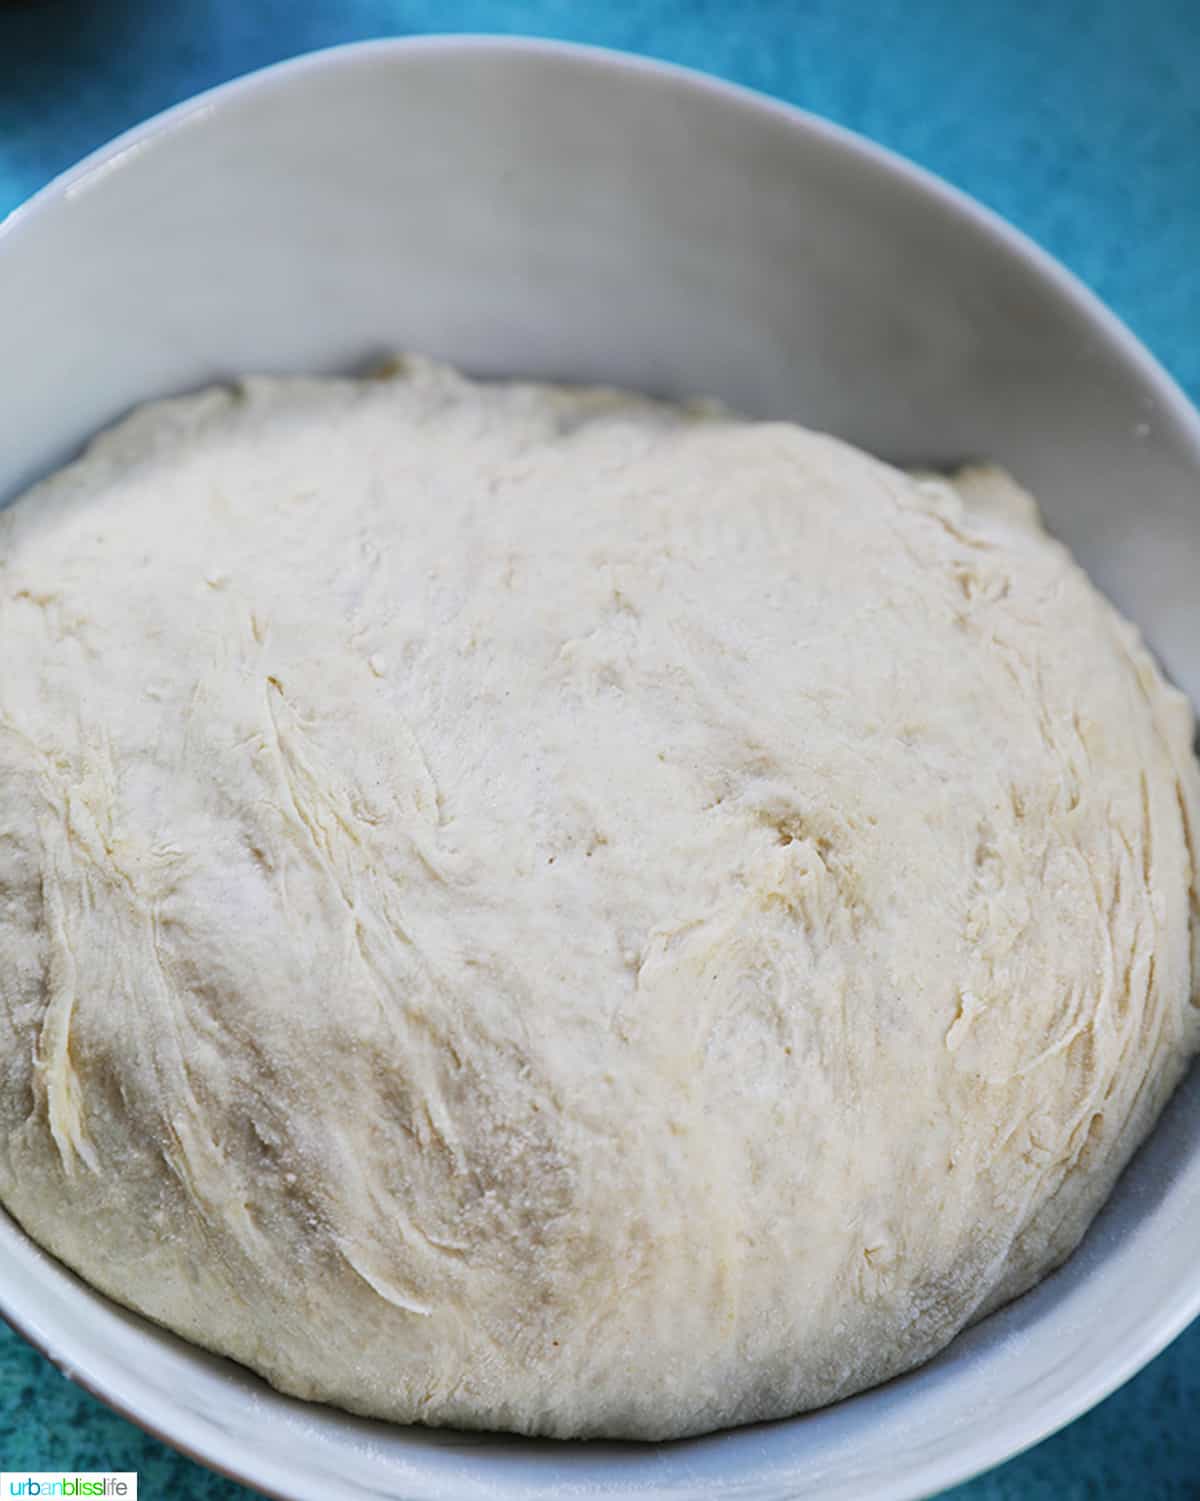 proofed pizza dough, raw, in a white bowl on blue table.